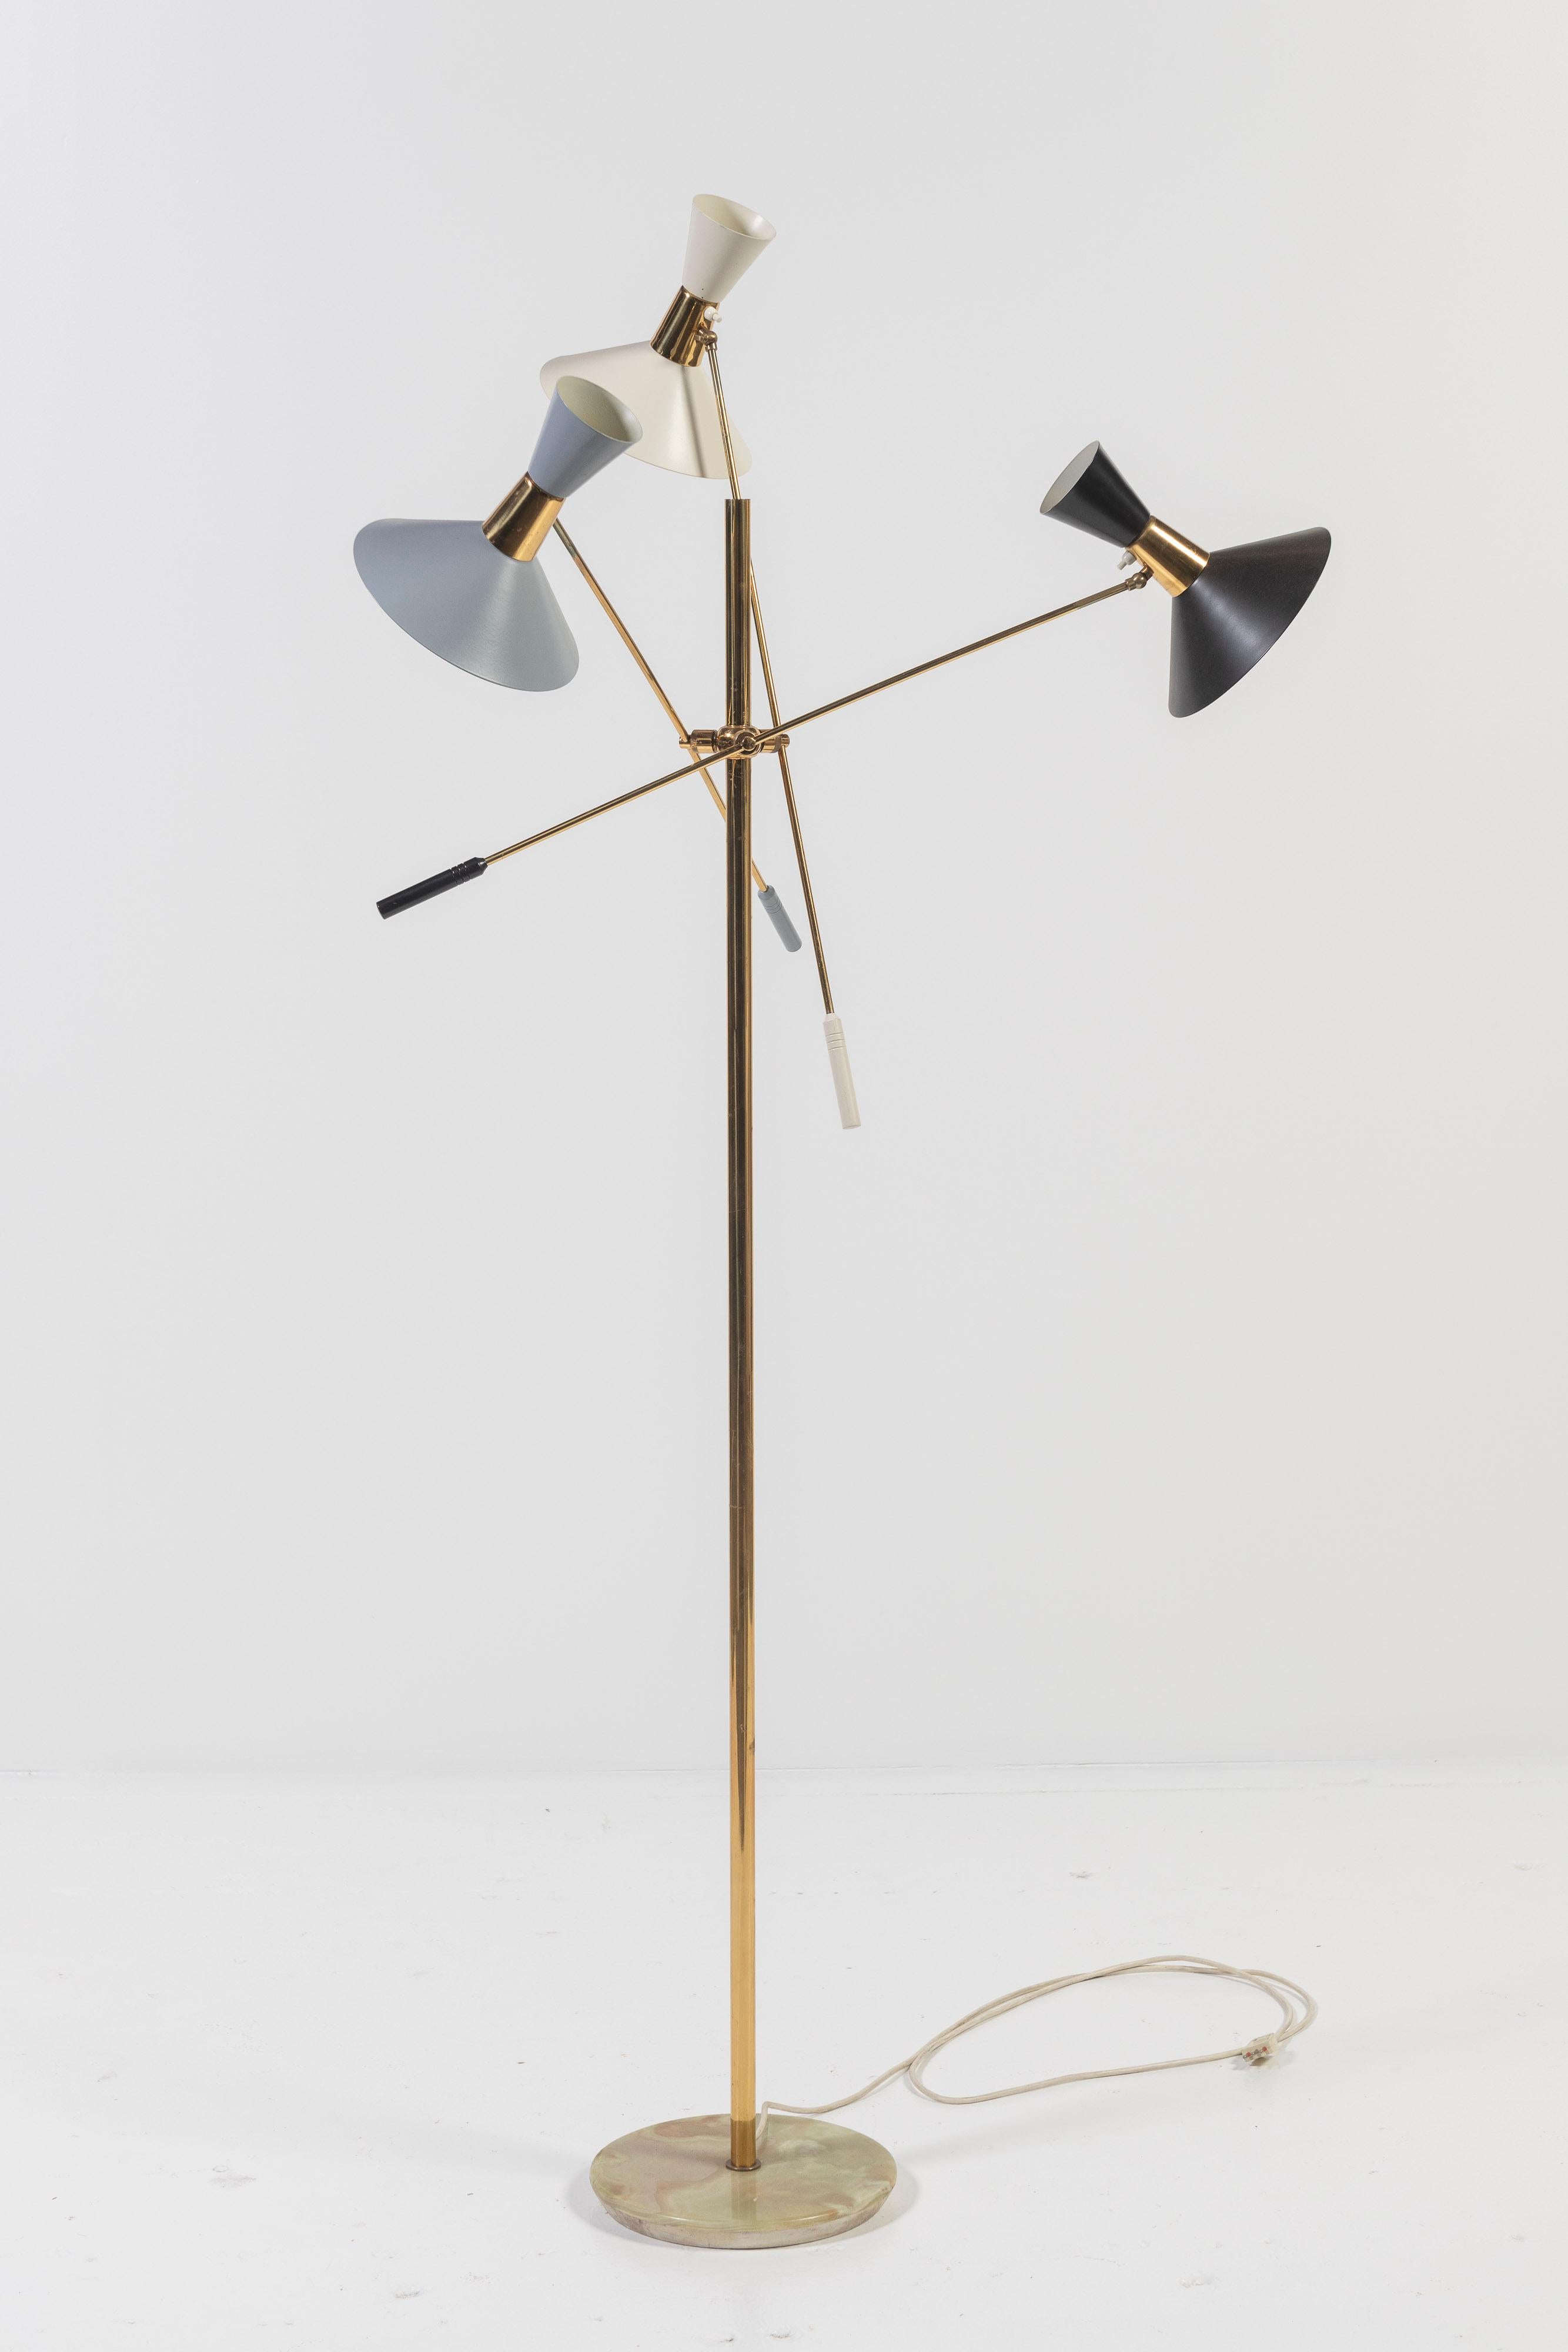 Mid-Century Modern Italian Floor Lamp, Lacquered Aluminum Shades with Three Arms In Good Condition For Sale In San Francisco, CA